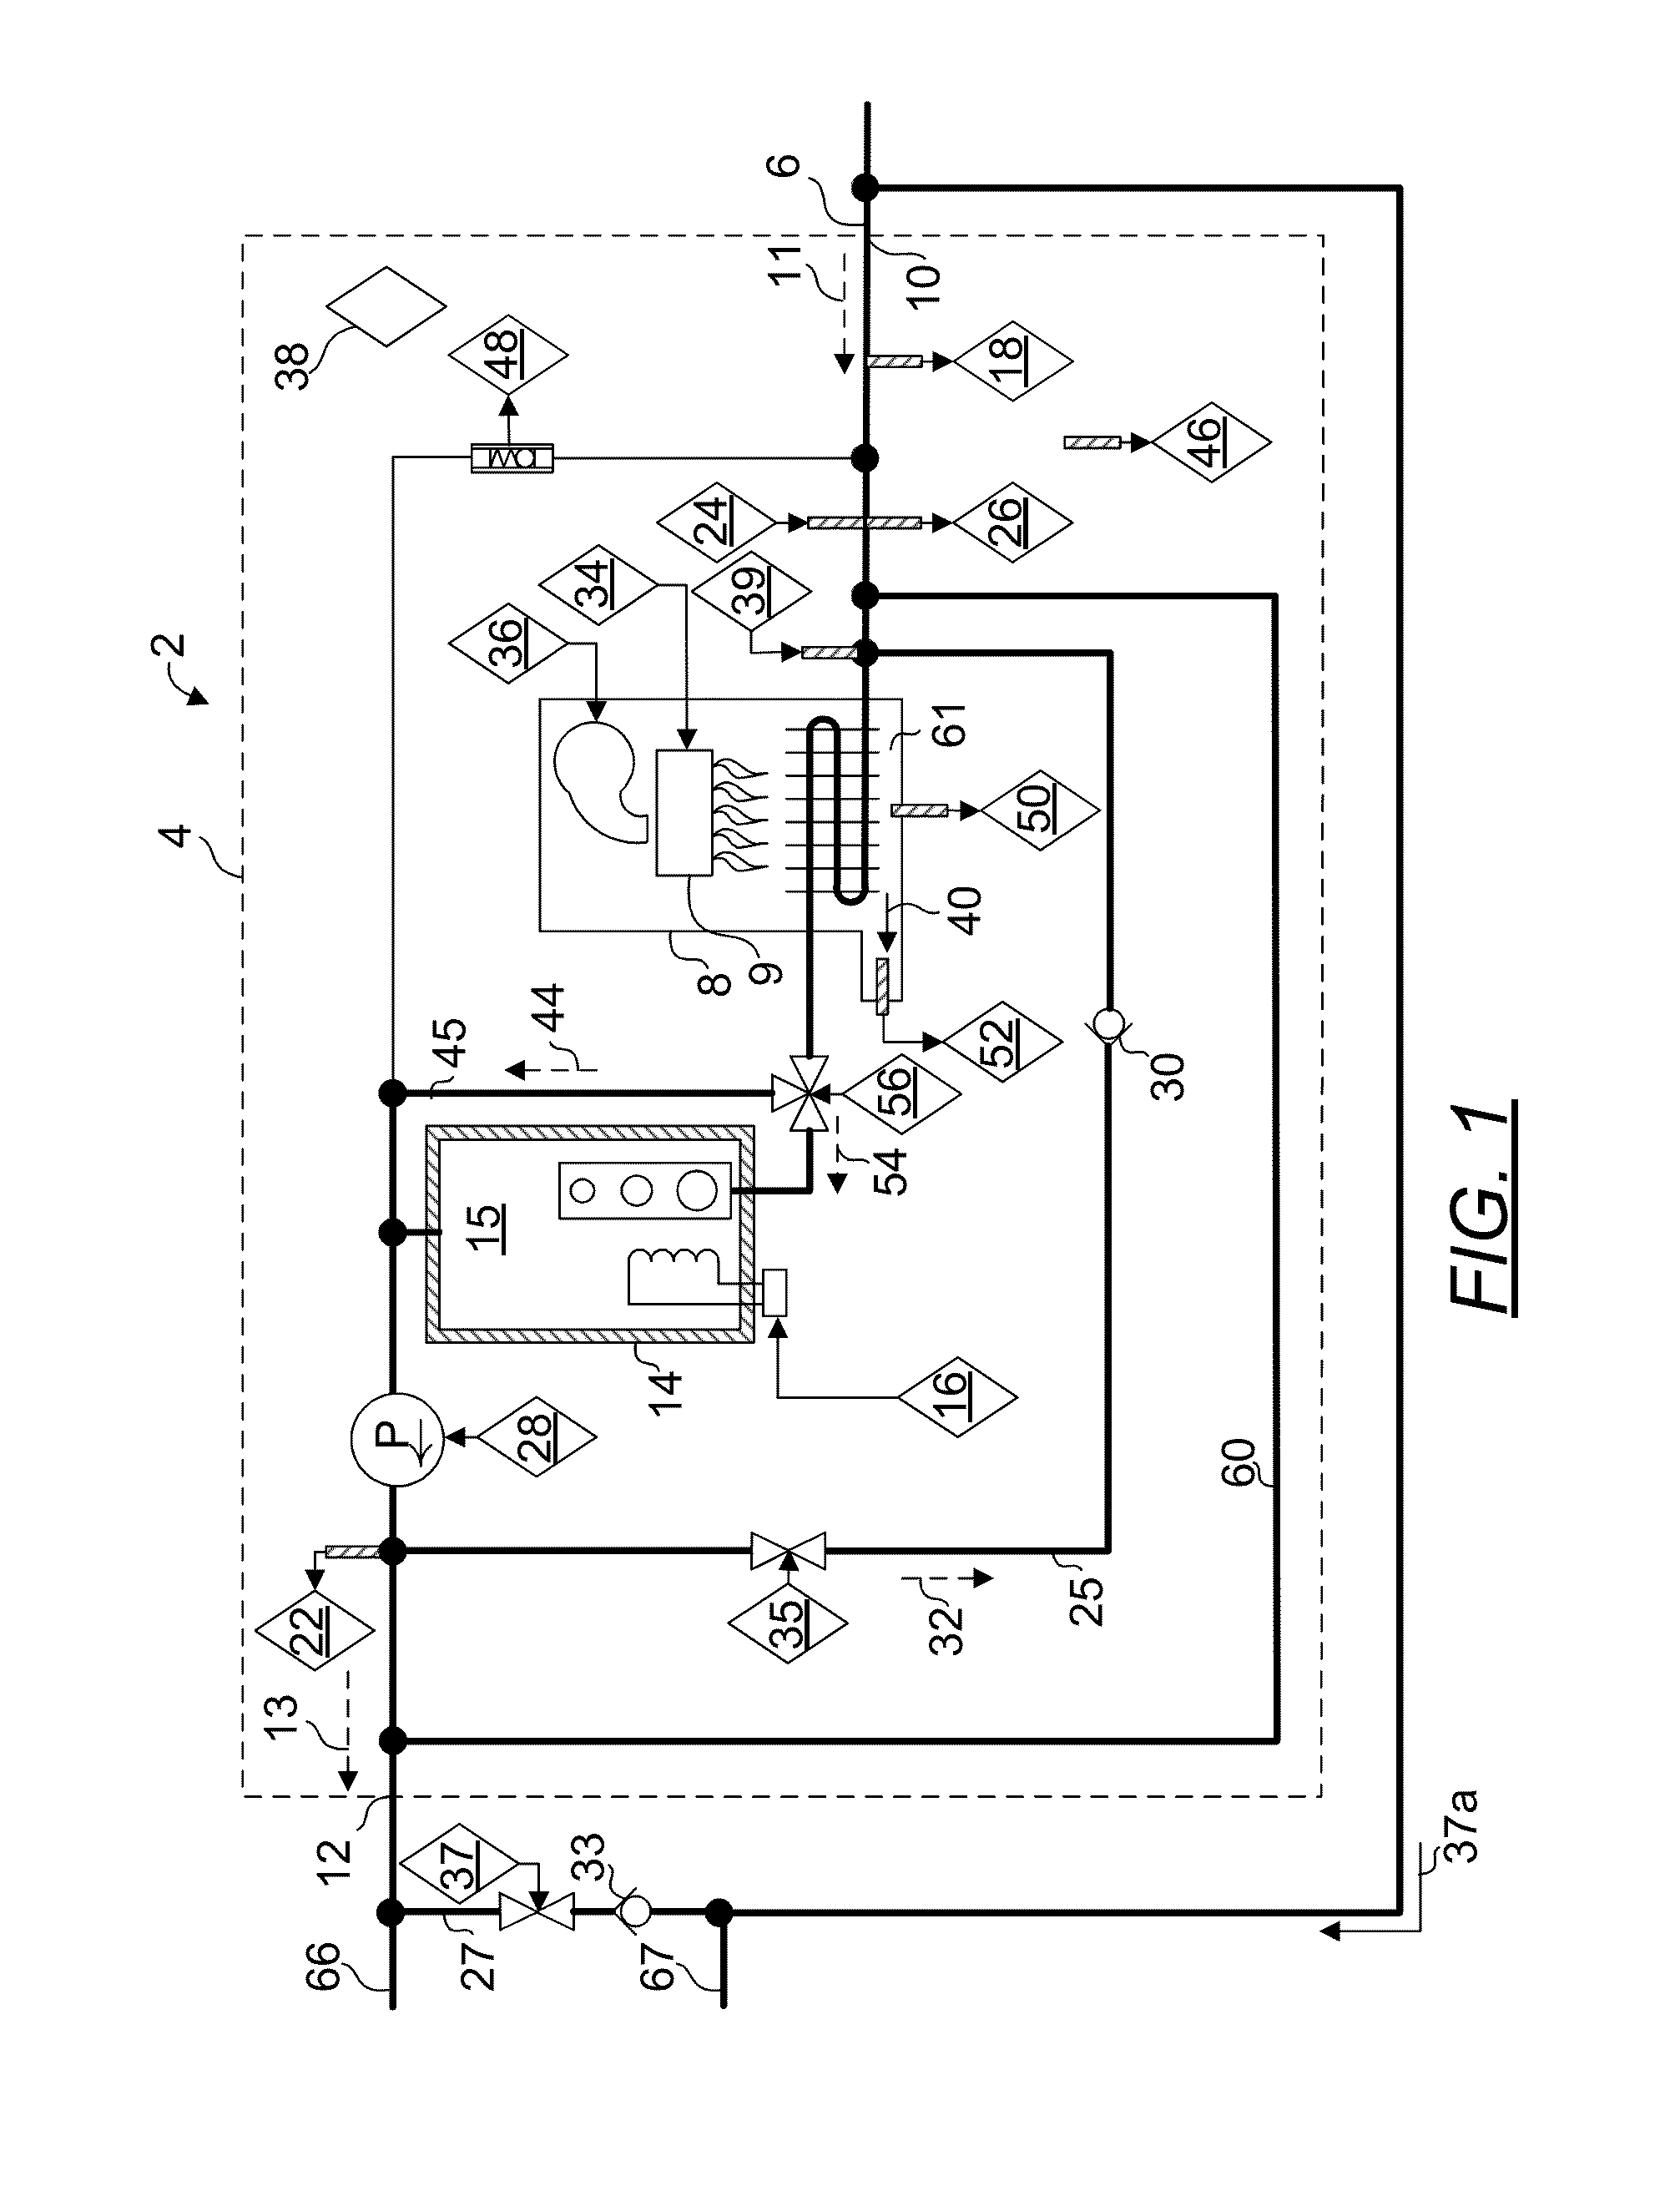 Adaptive heating control system for a water heater